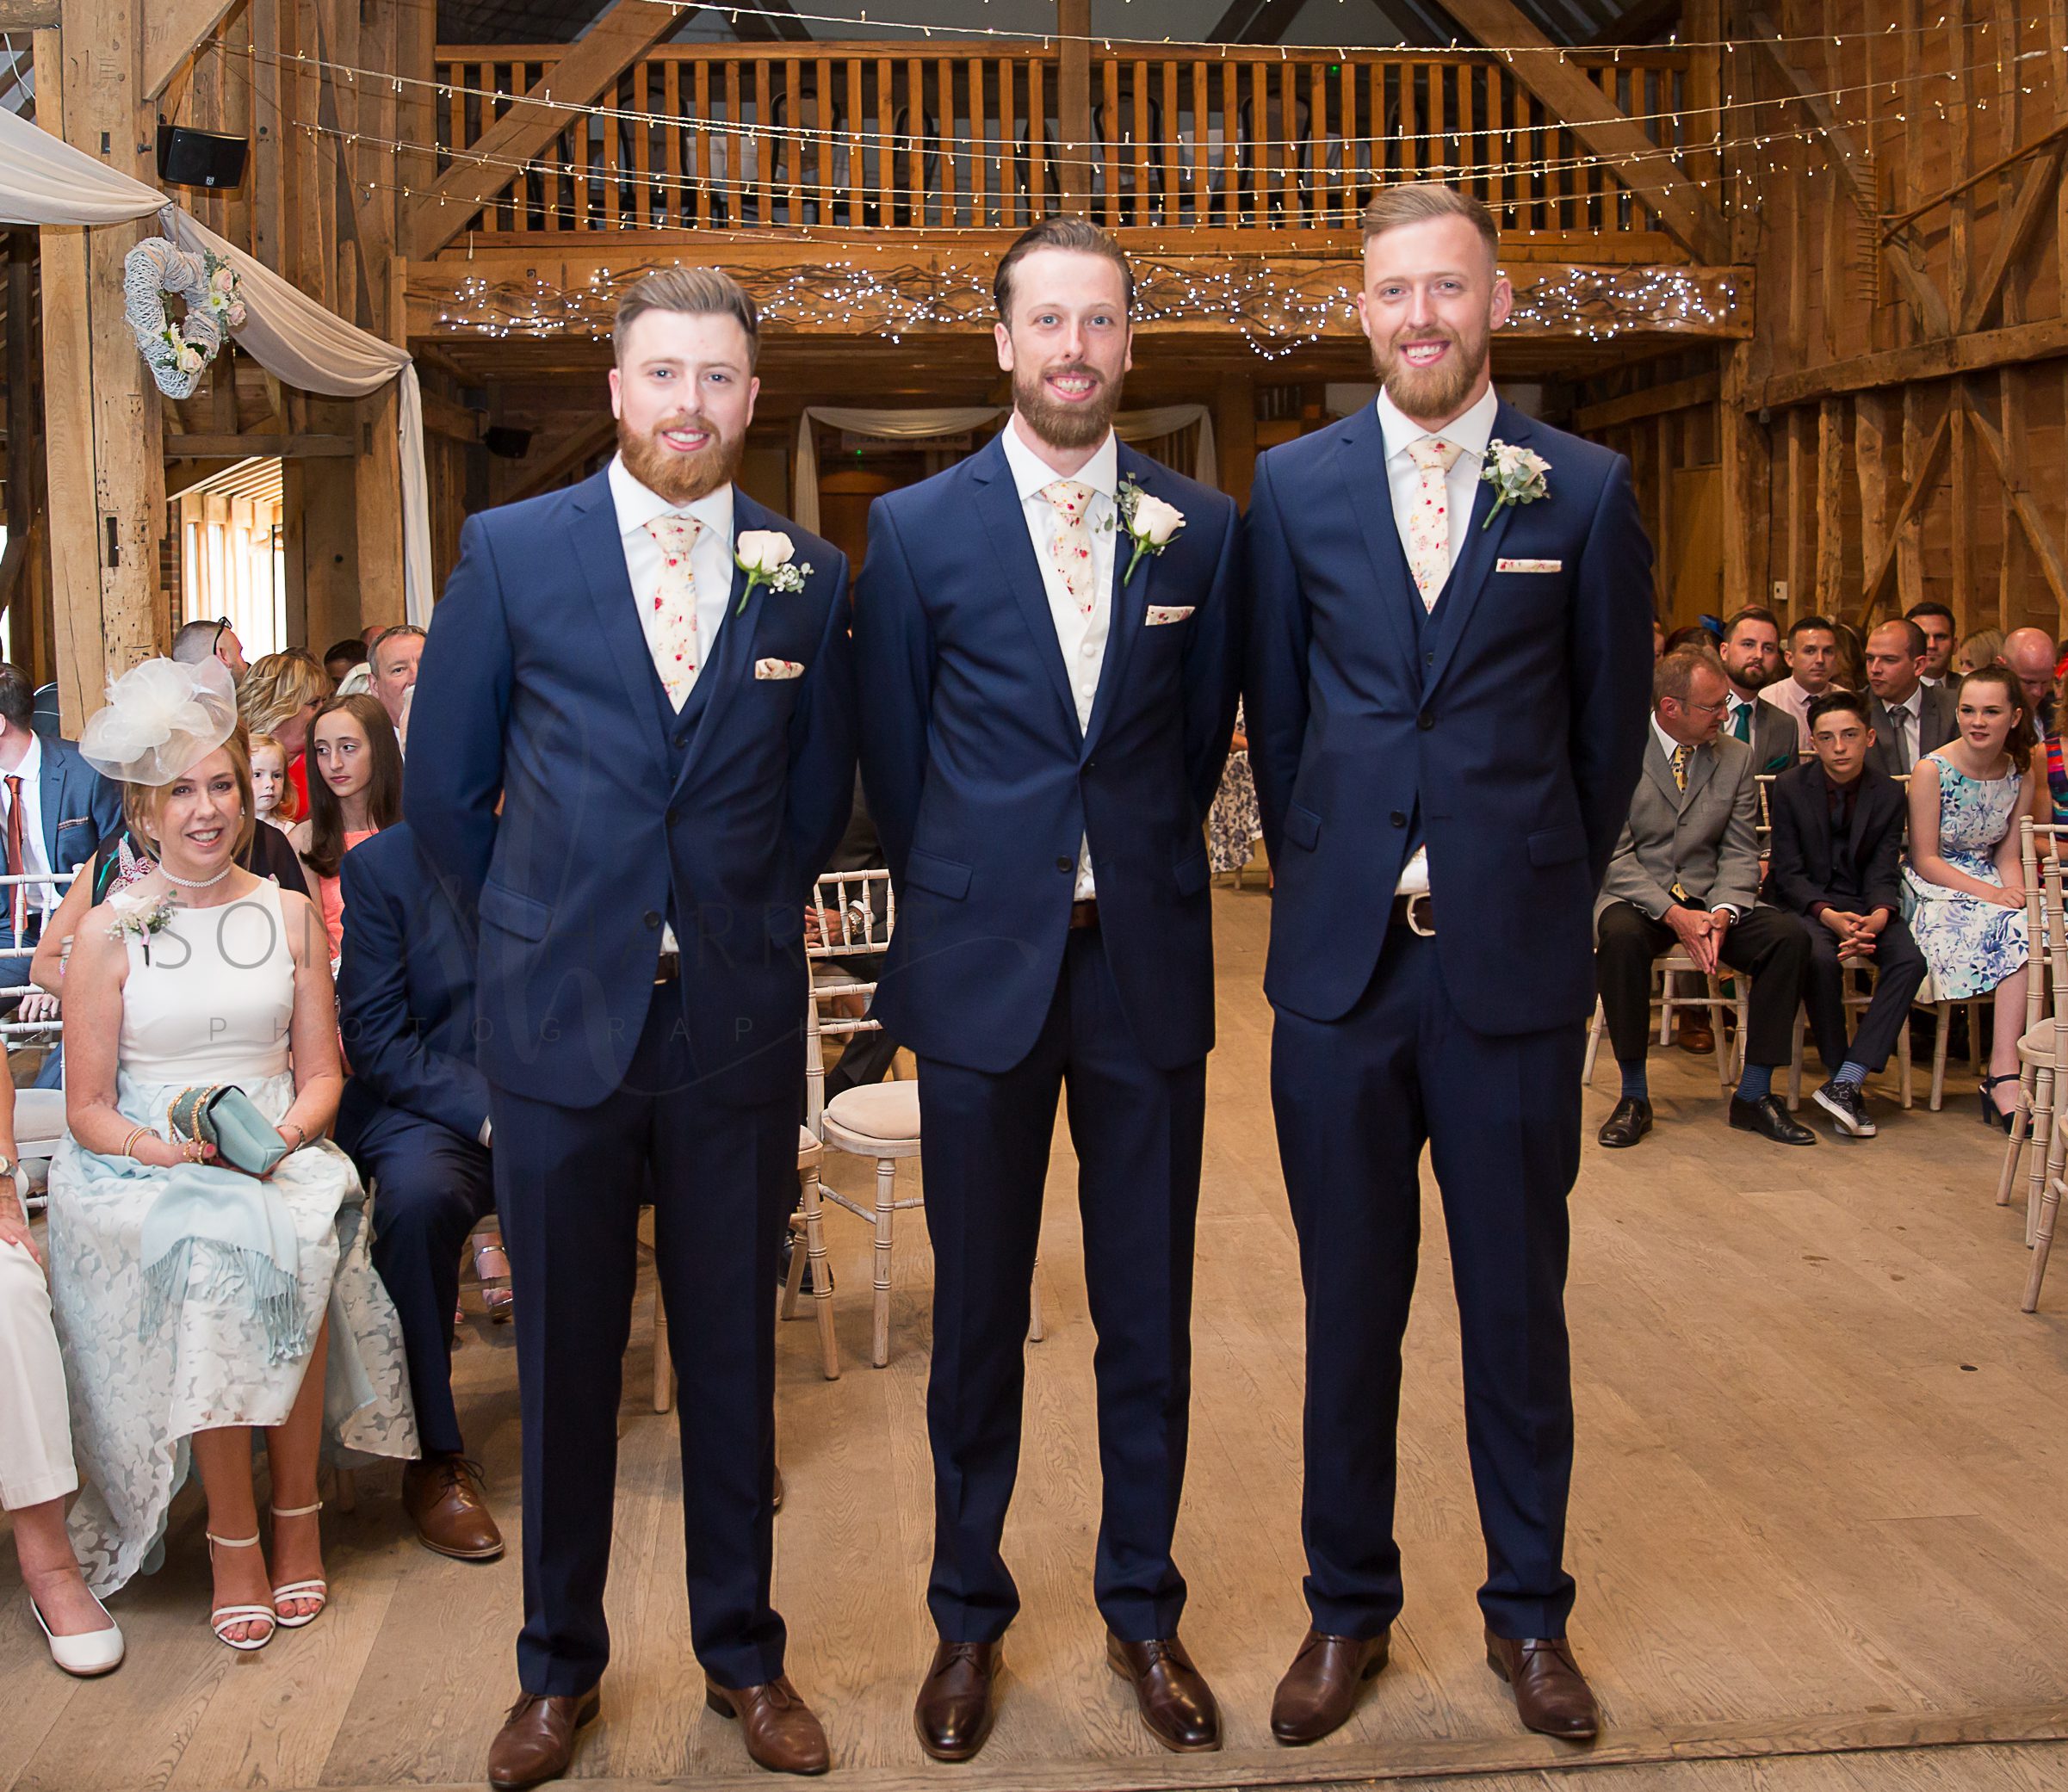 three brothers and groom waiting for the bride Tewinbury farm hotel outdoor wedding photograph of bride and groom by Sonya Harrap photographer